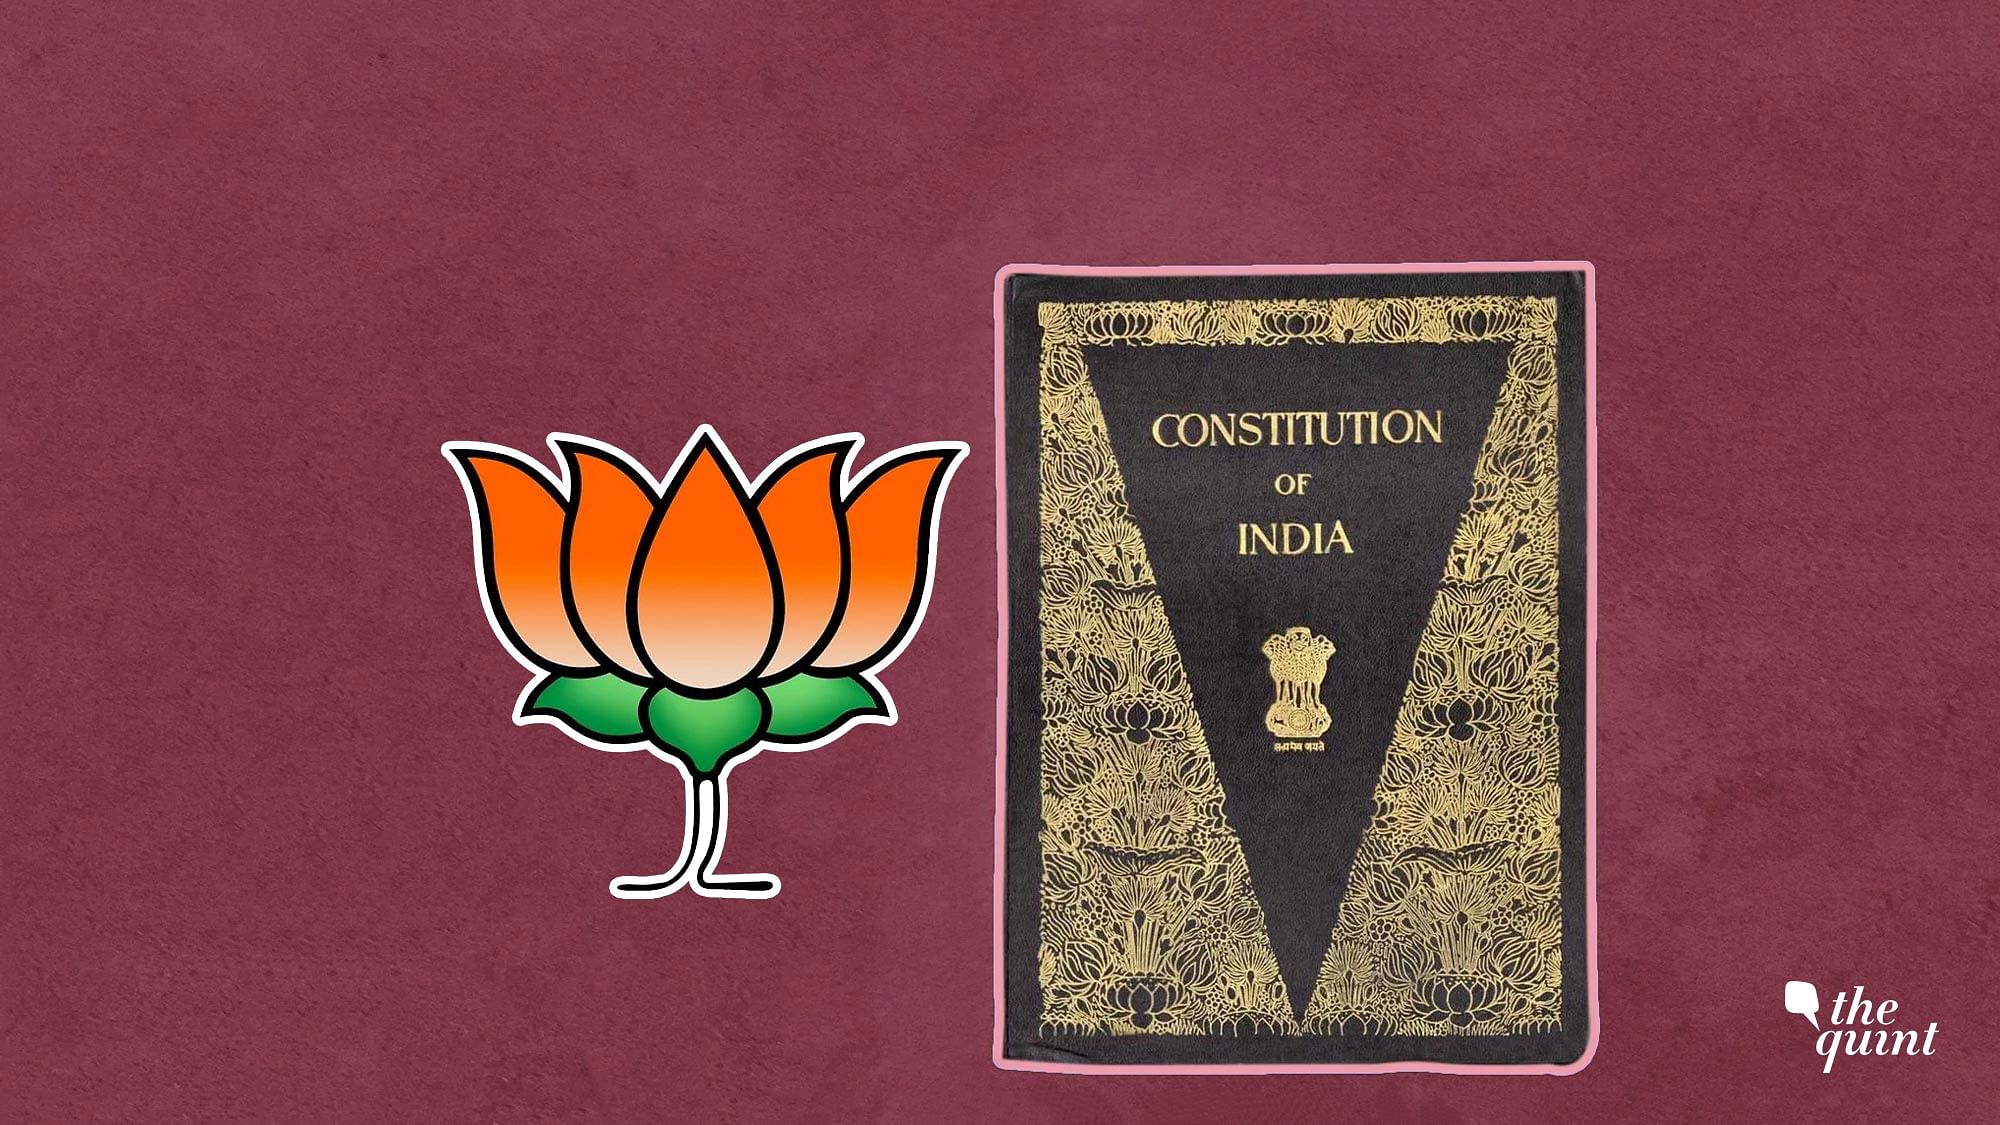 PRS Legislative on Twitter The Constitution of India was enacted by the  Constituent Assembly on November 26 1949 The enactment of the Constitution  of India completes 70 years today httpstcog04bjv010H  Twitter